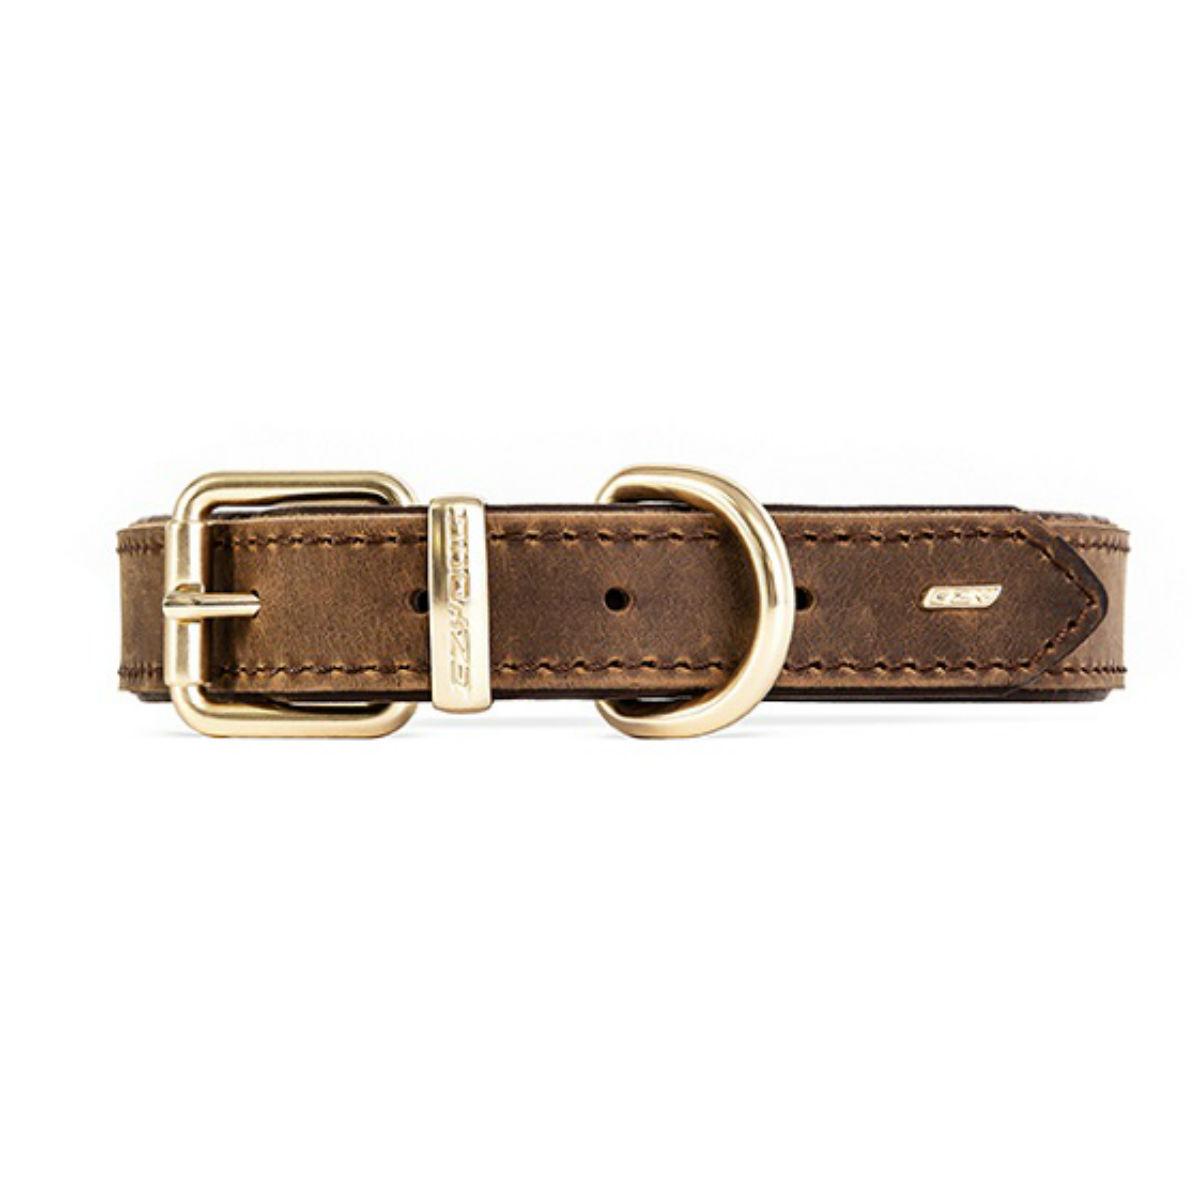 Oxford Brown Leather Dog Collar - X-Large